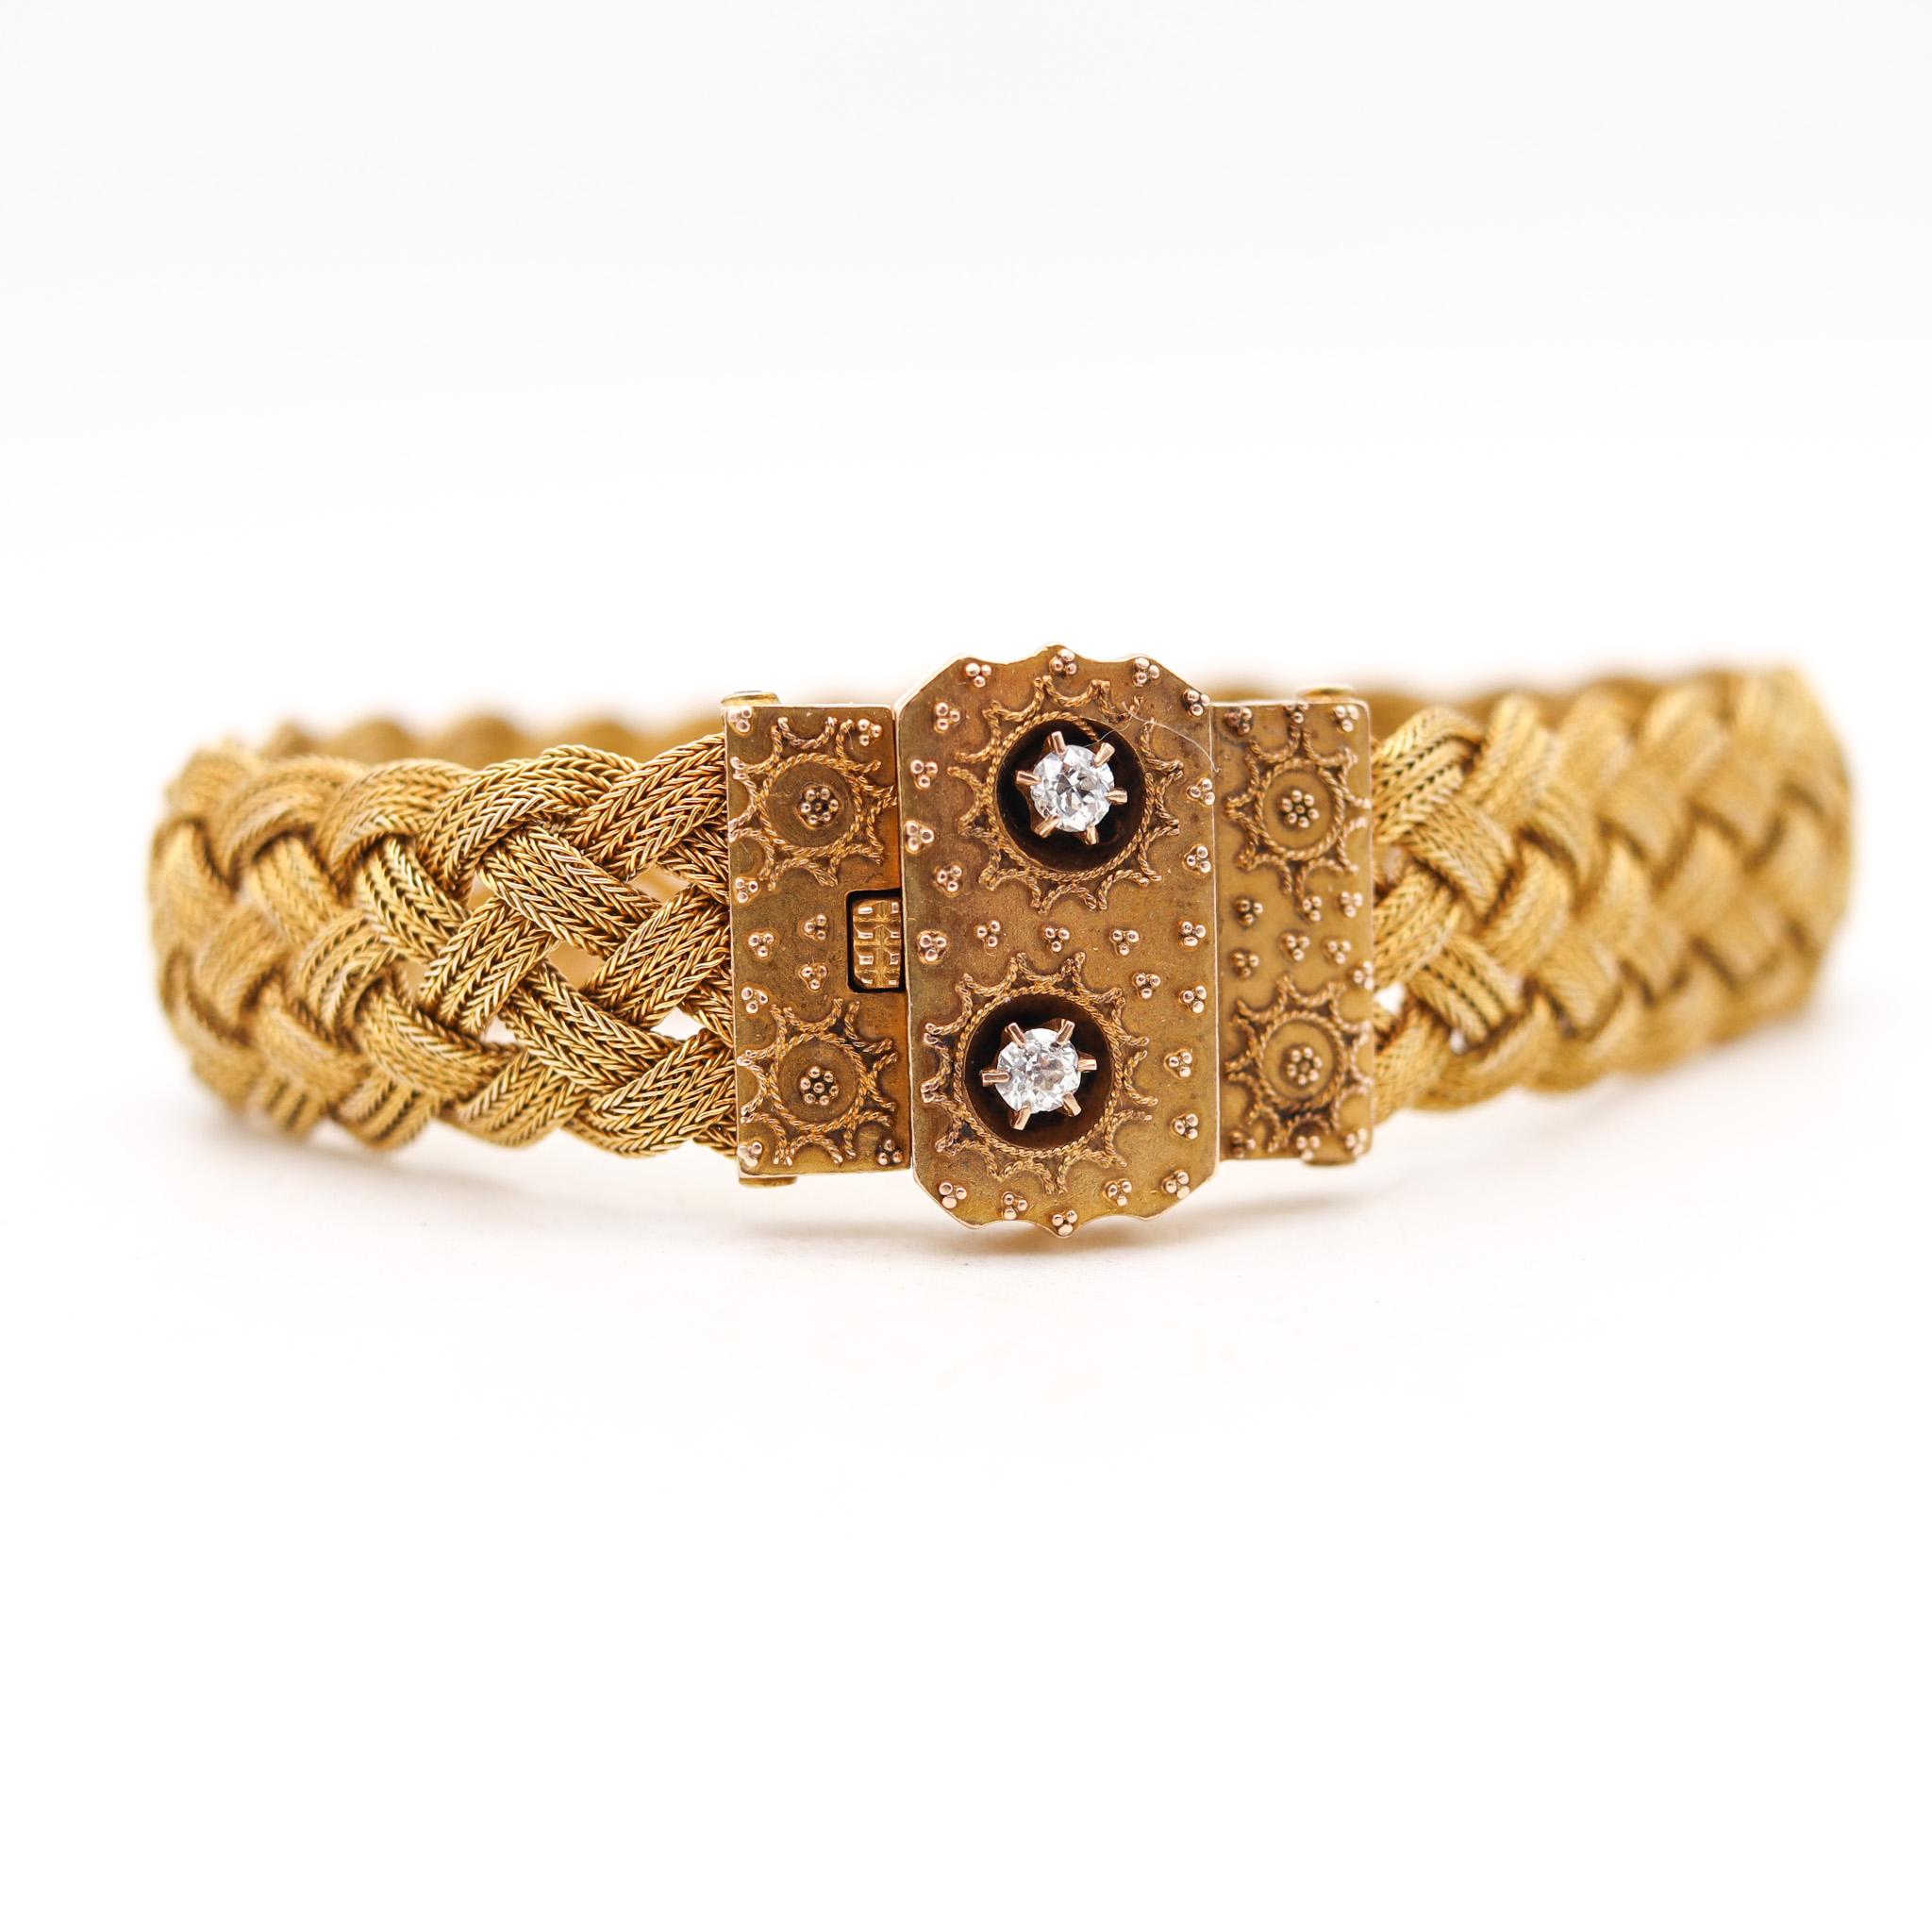 An Etruscan revival bracelet from the Victorian period.

Beautiful woven flexible bracelet, created in England during the Victorian period (1837-1901), back in the 1860. The gorgeous design is made up with an intricate and magnificent woven work,